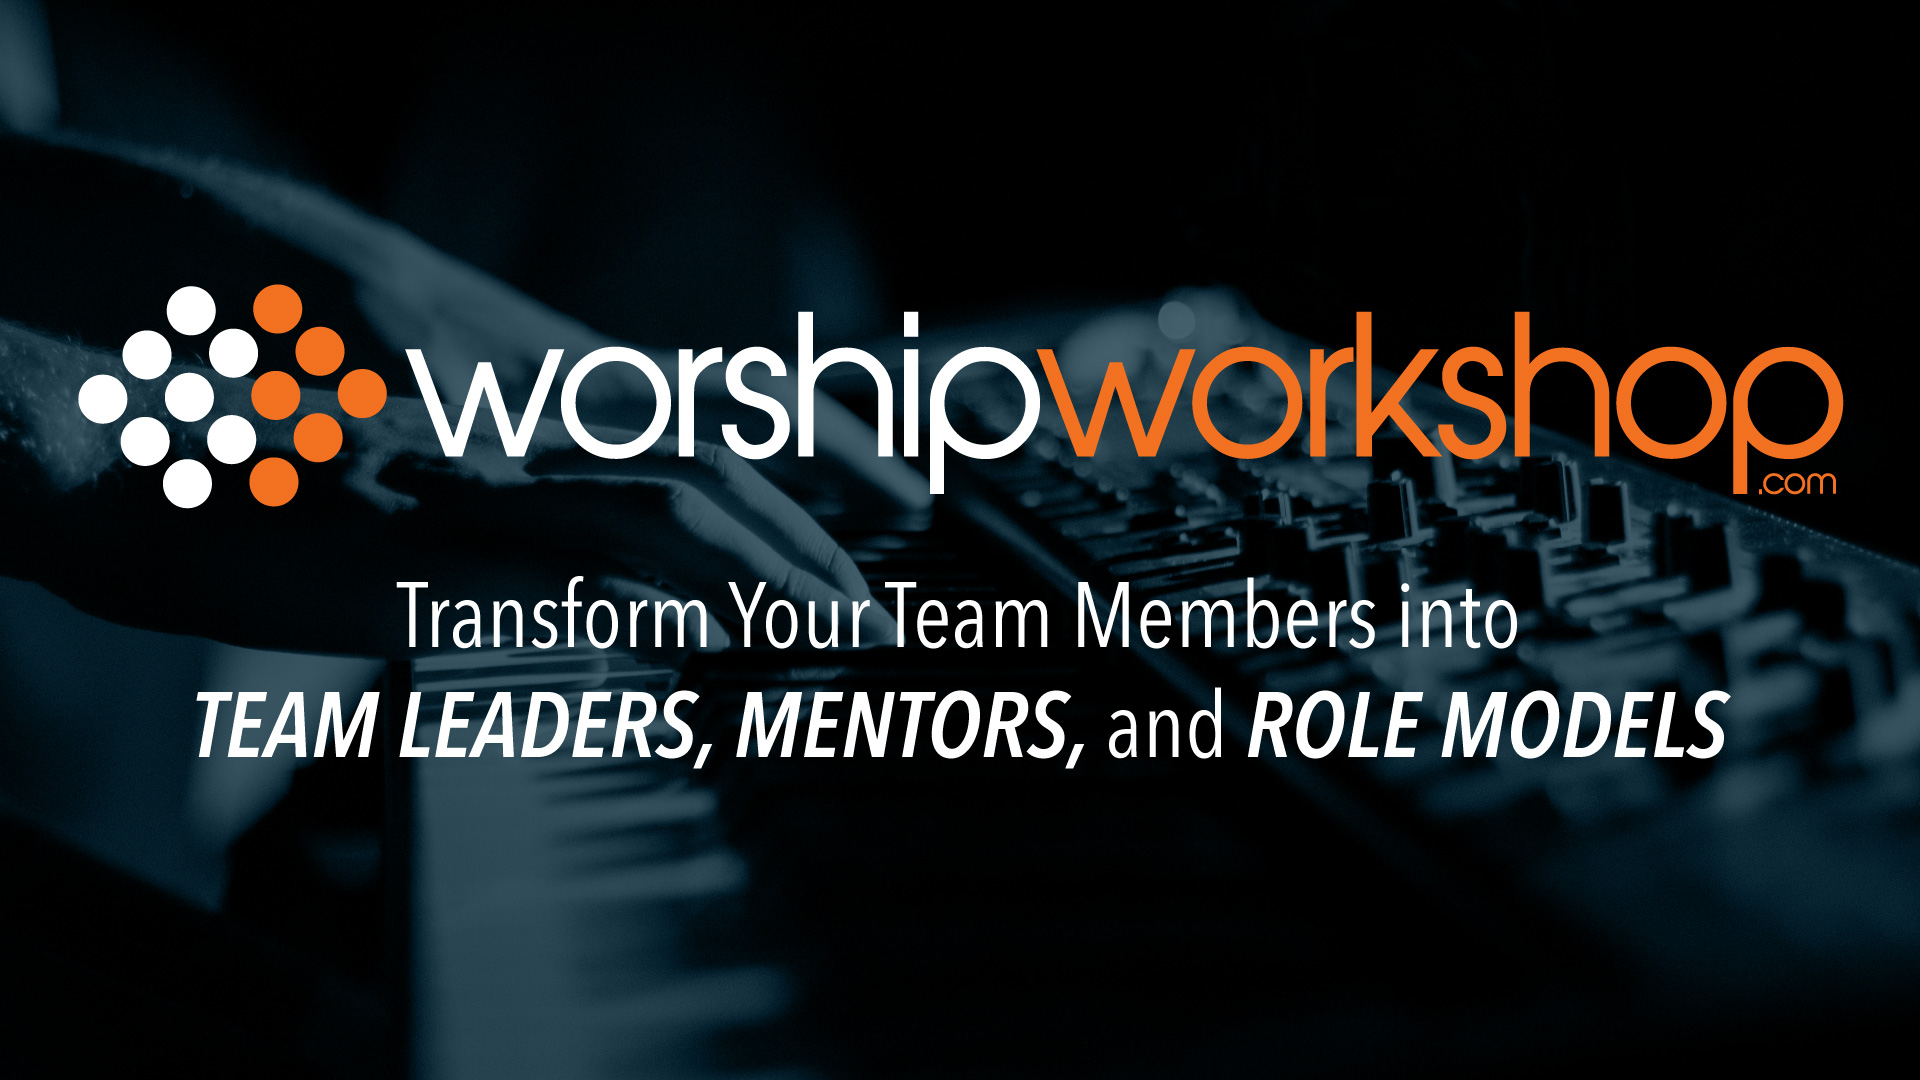 WORSHIP WORKSHOP: Transform Your Team Members into Team Leaders, Mentors and Role Models